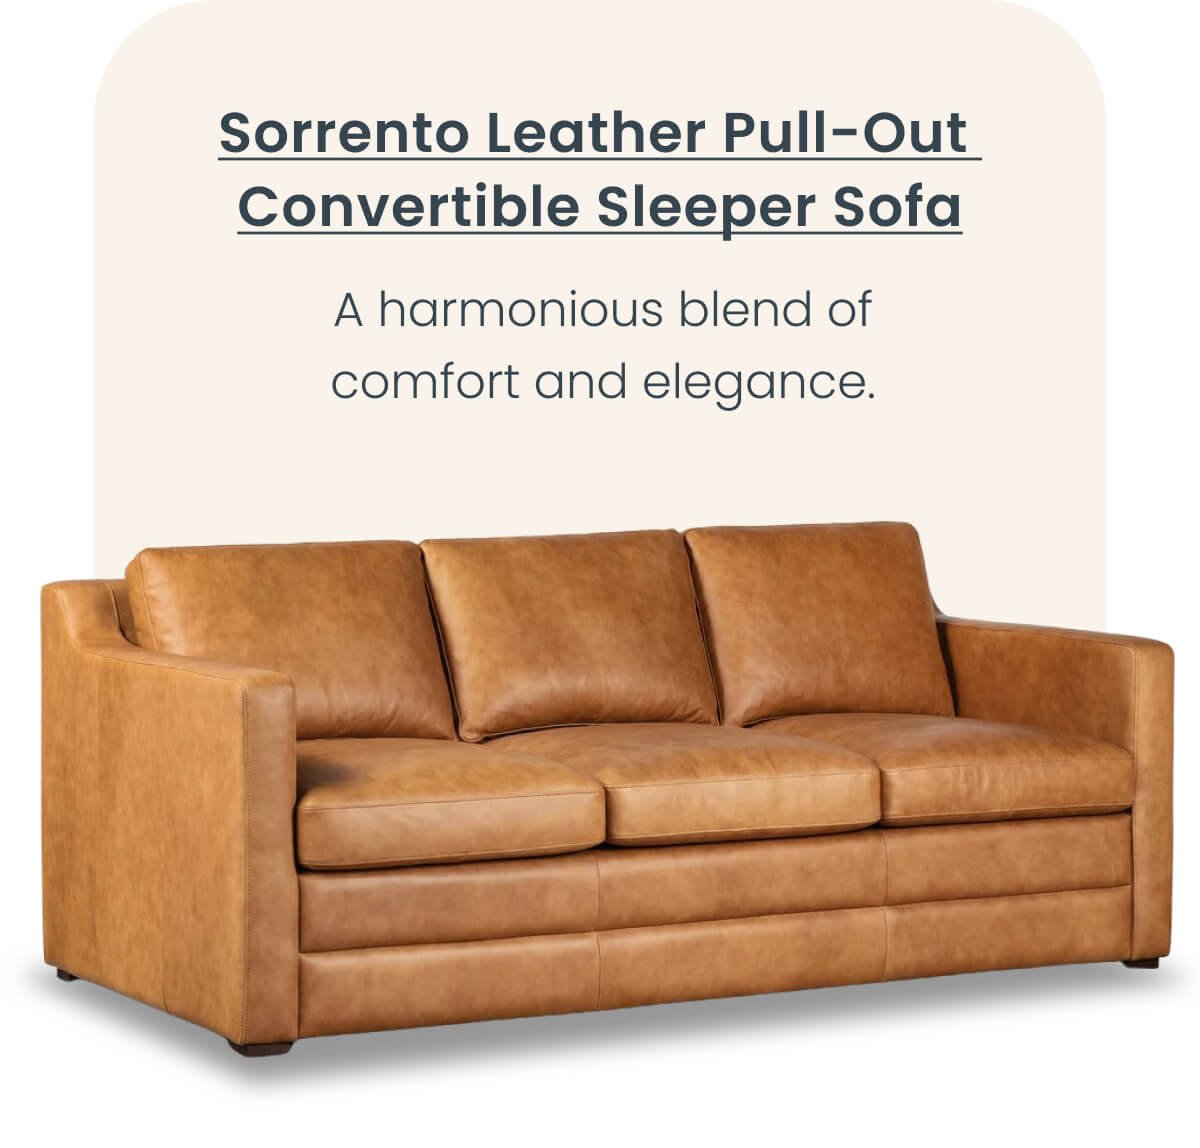 Sorrento Leather Pull-Out Convertible Sleeper Sofa